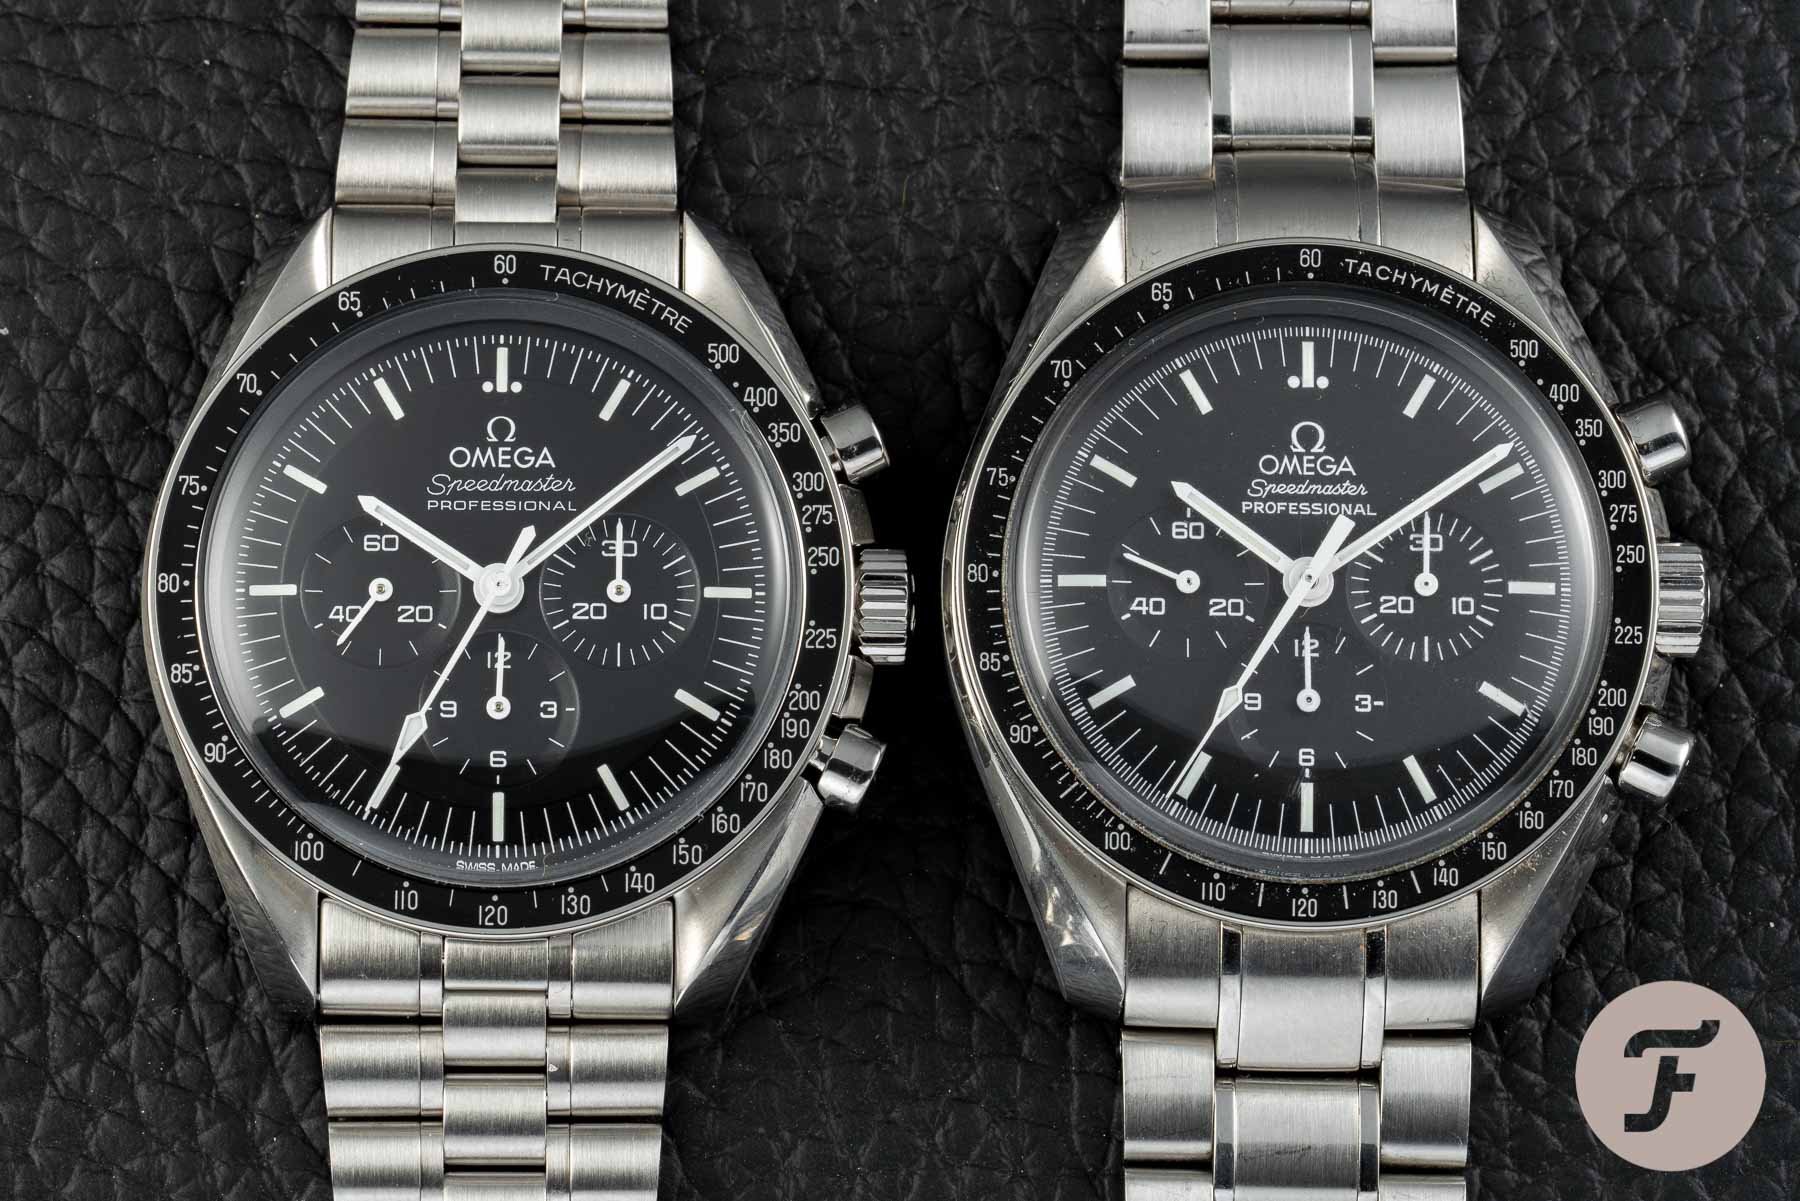 MoonSwatch Vs. Omega Moonwatch Prices, Explained